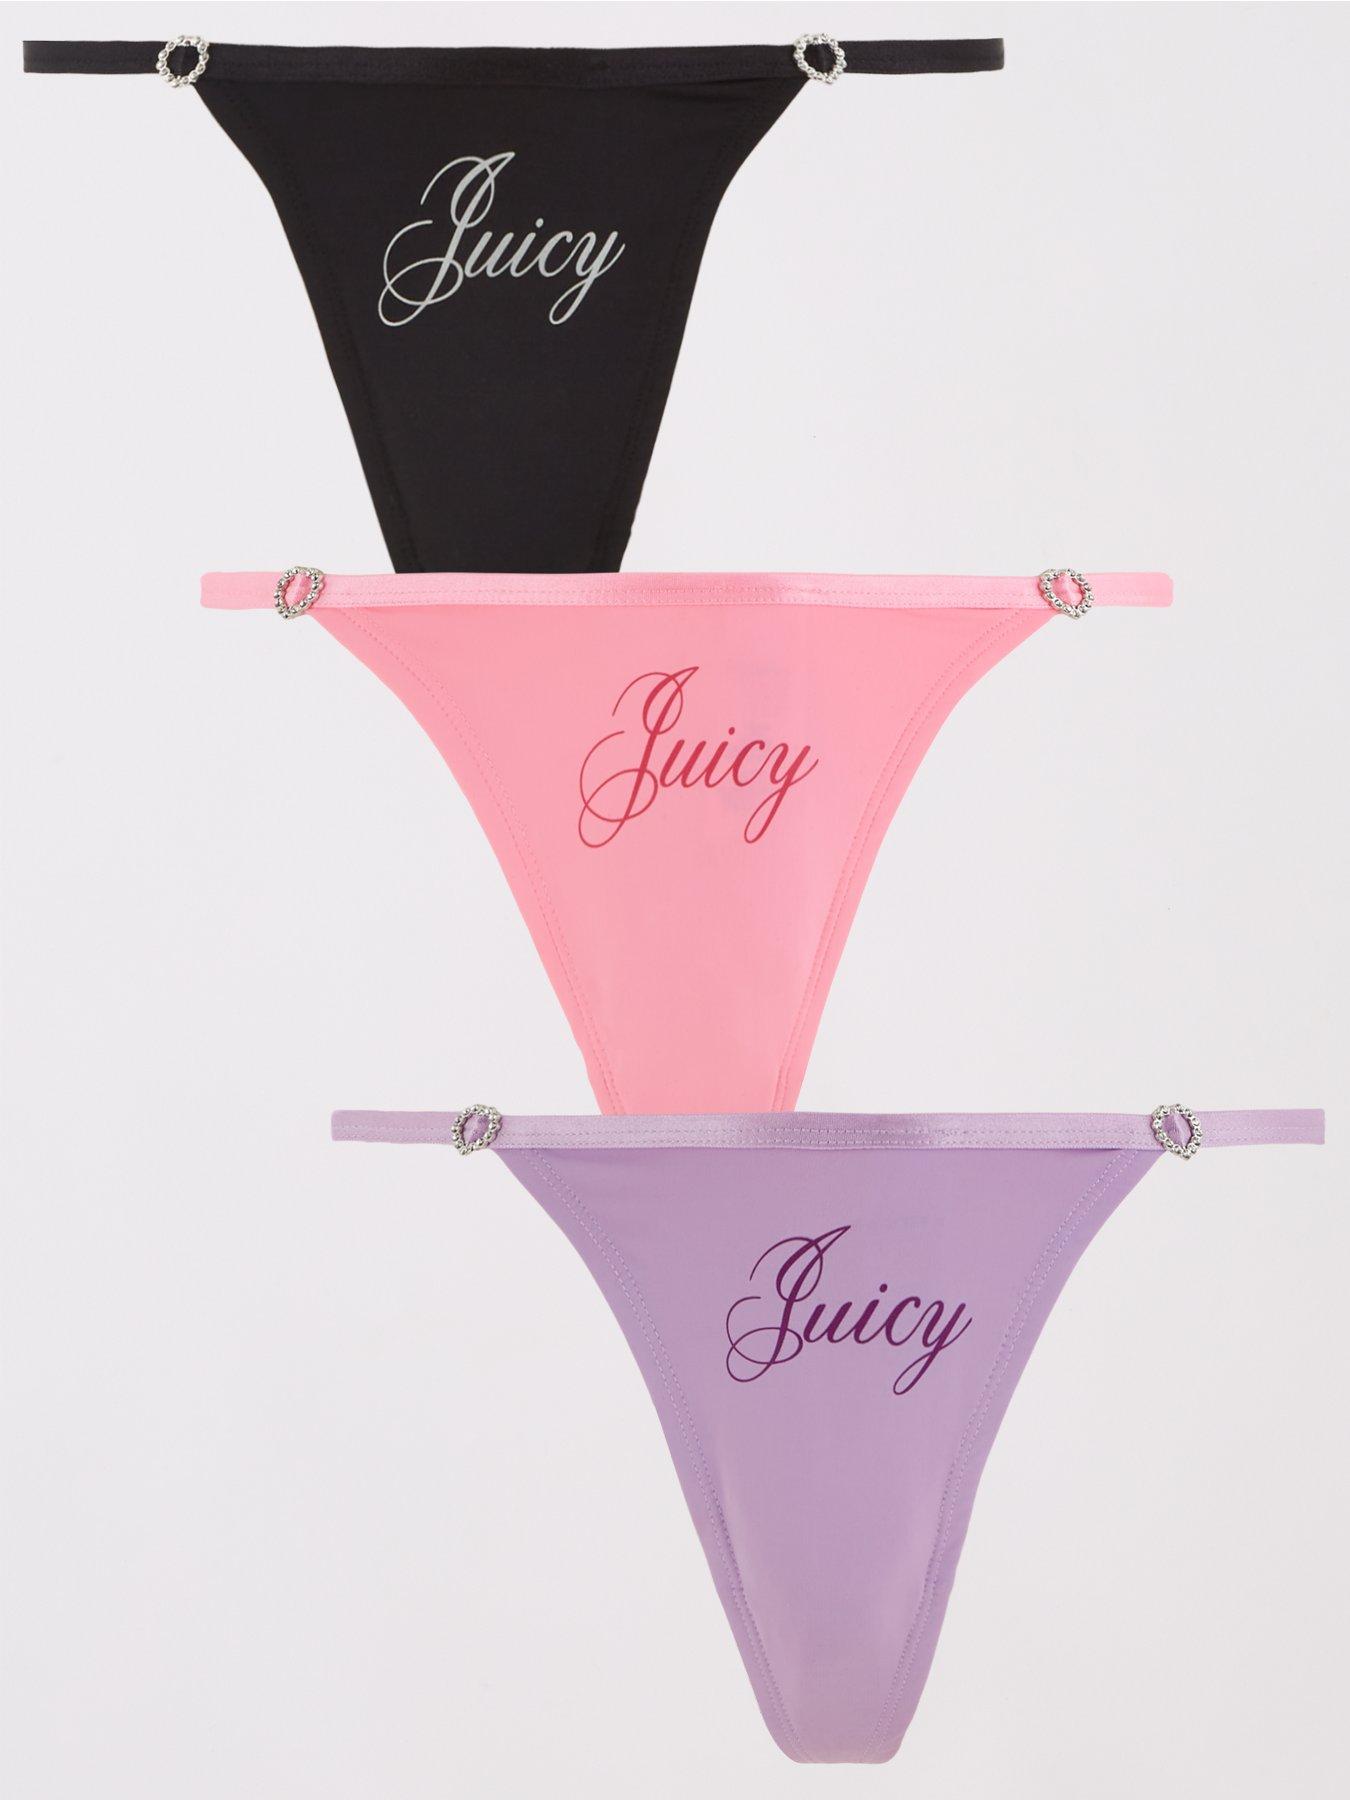 Juicy Couture Thong no panty lines 3 pk black white and pink size Large